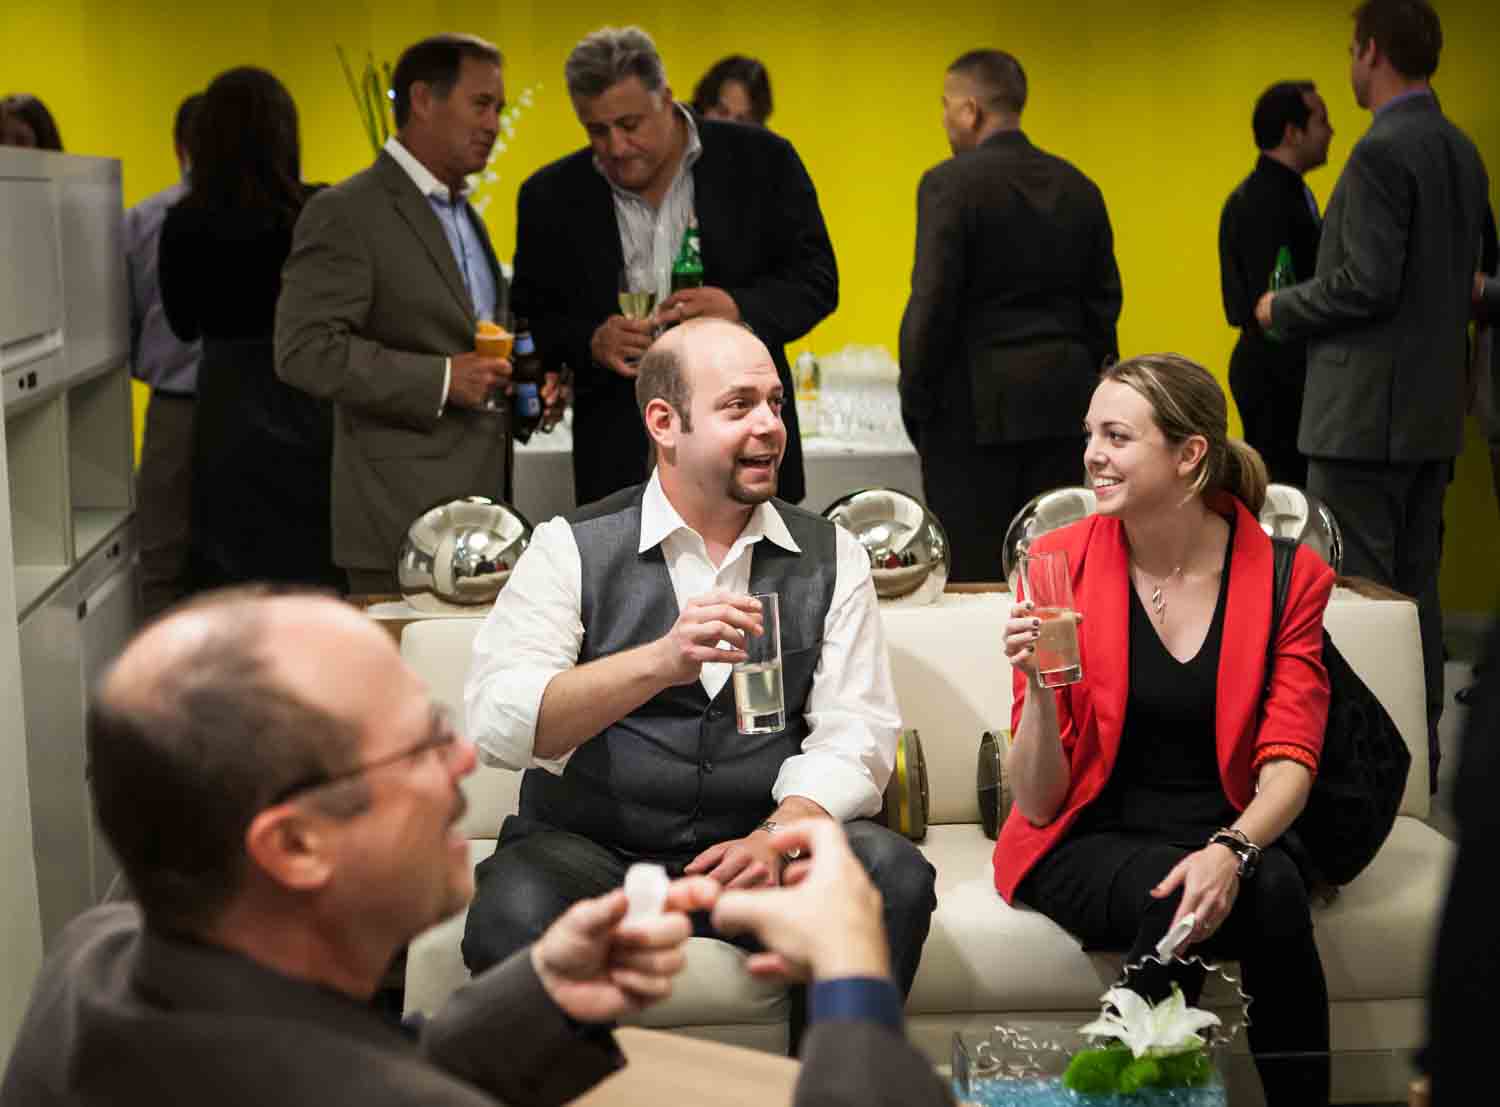 Guests talking at a corporate cocktail party for an article on corporate event planning tips